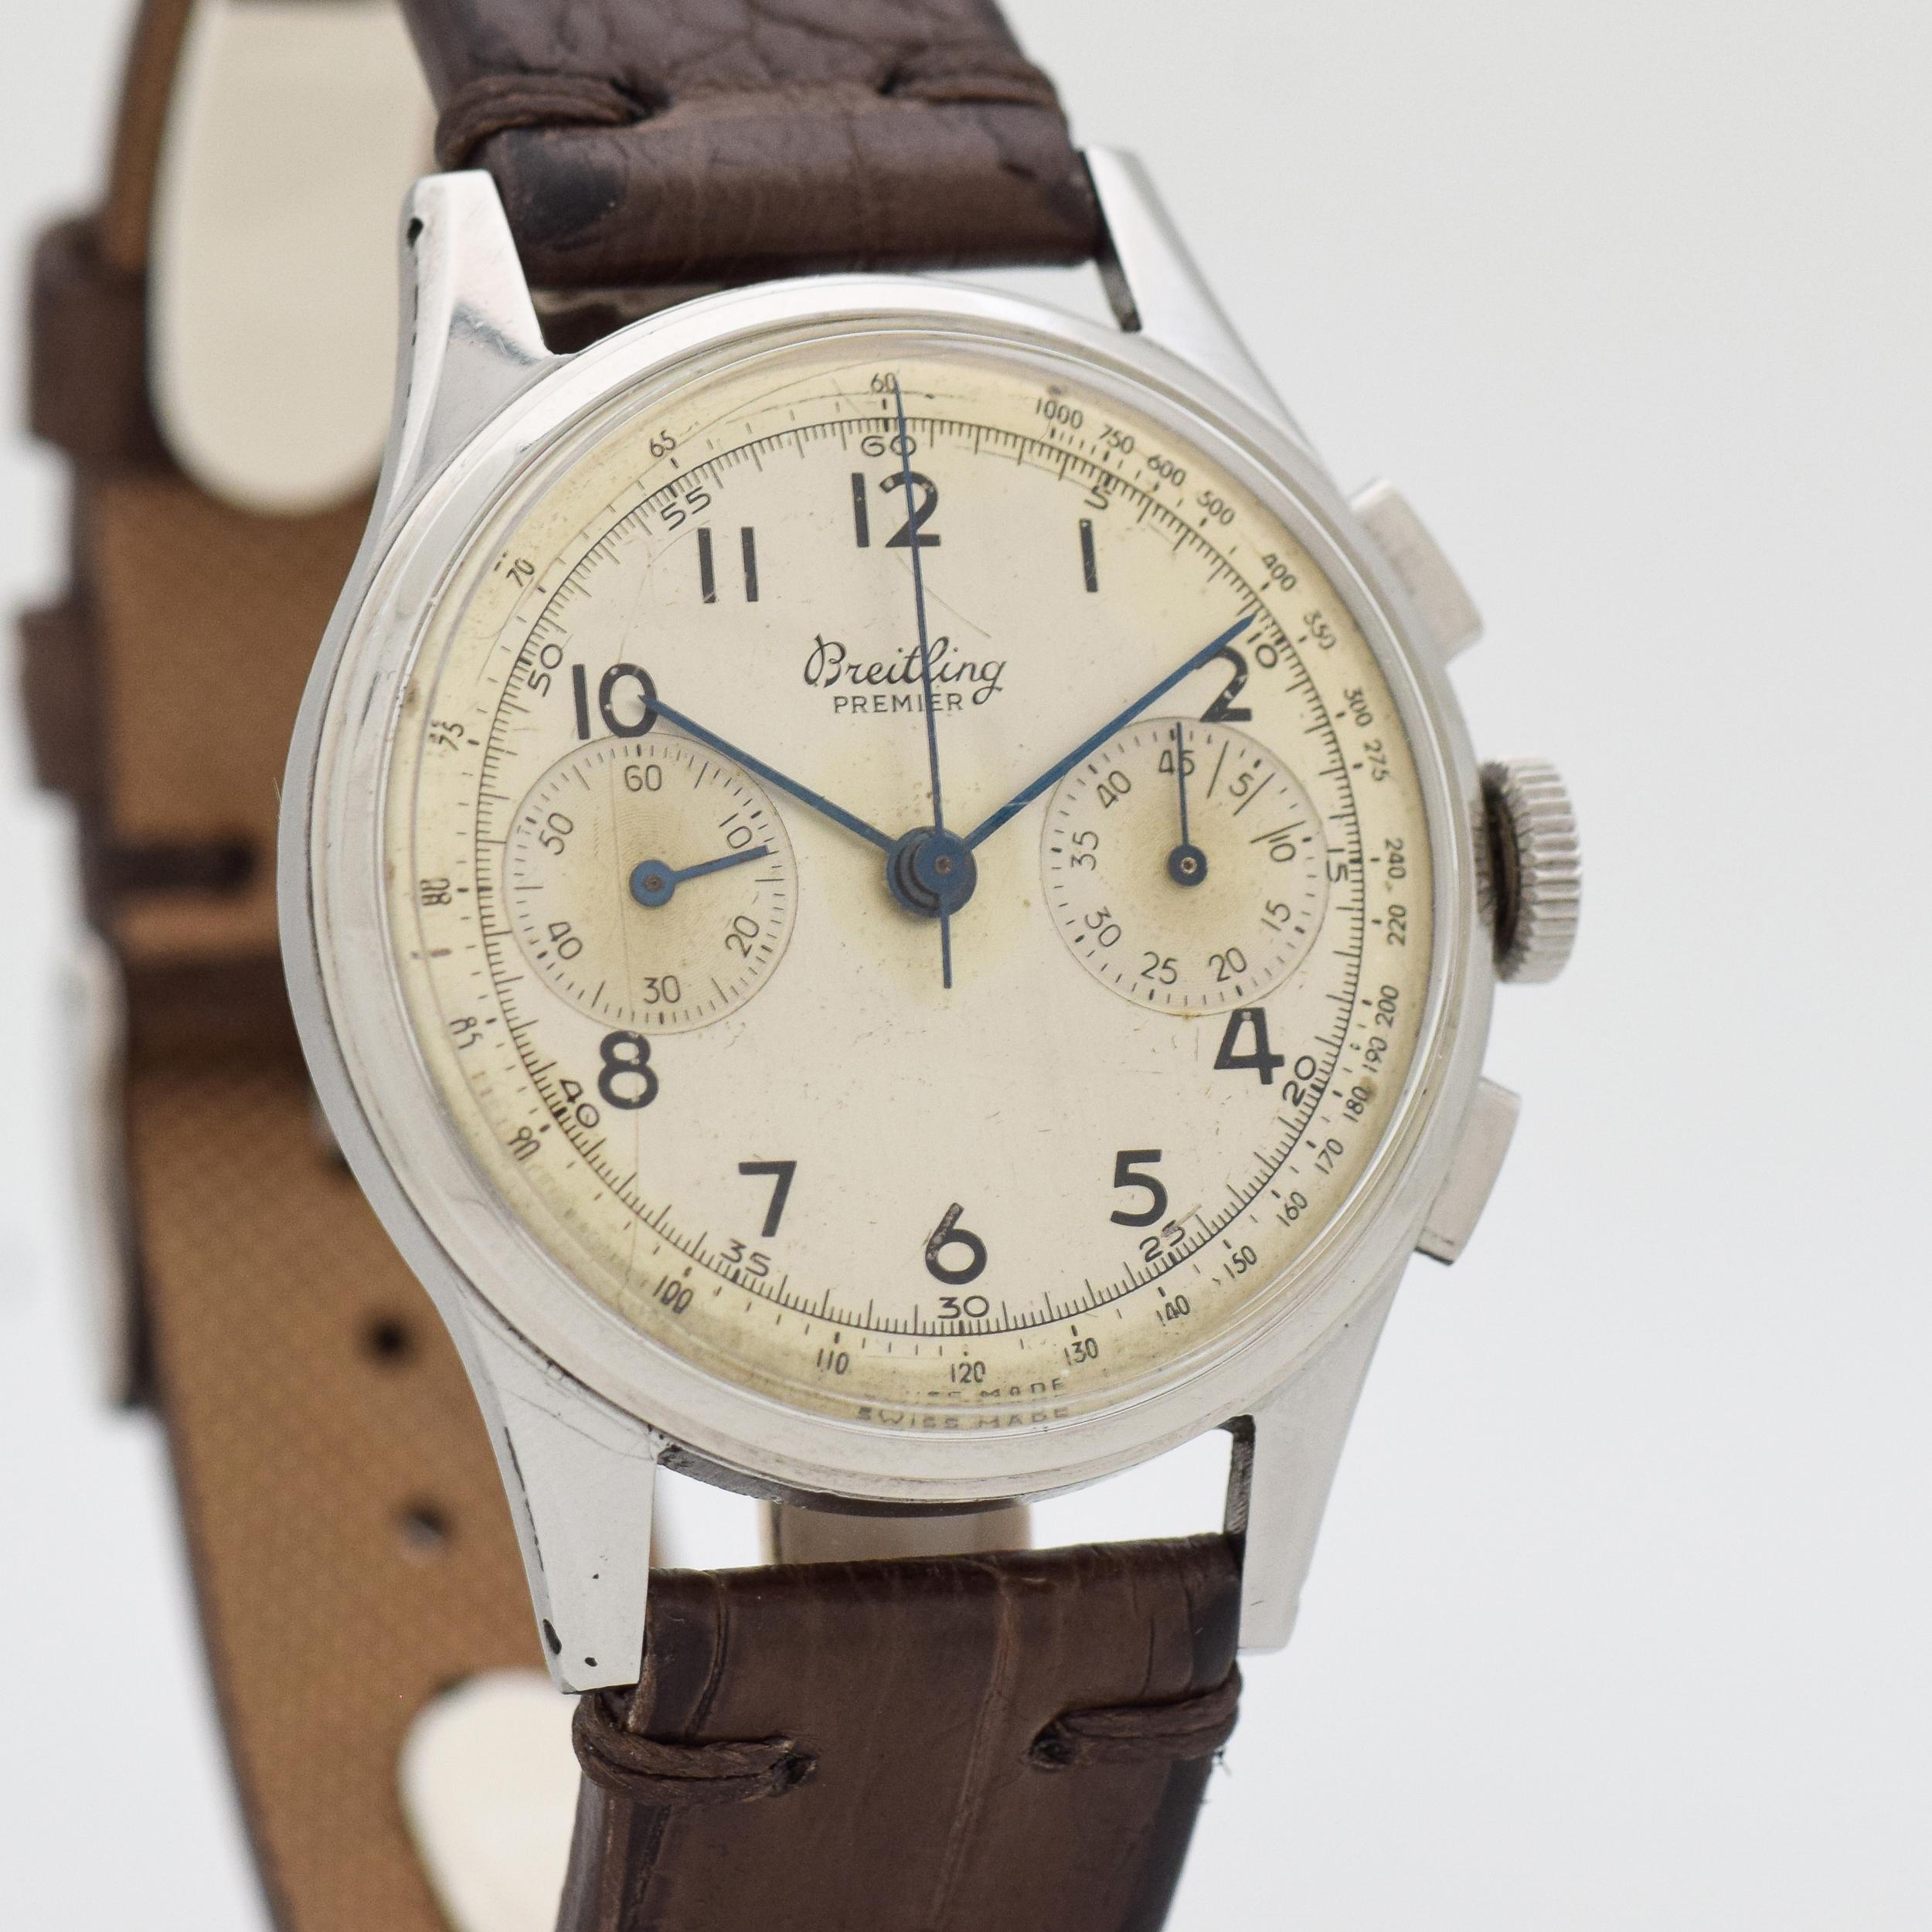 1945 Vintage Breitling Premier Ref. 760 Stainless Steel watch with Original Silver Dial with Painted Arabic Numbers. Case size, 36mm x 43mm lug to lug (1.42 in. x 1.69 in.) - Powered by a 17-jewel, manual caliber movement. Triple Signed.
